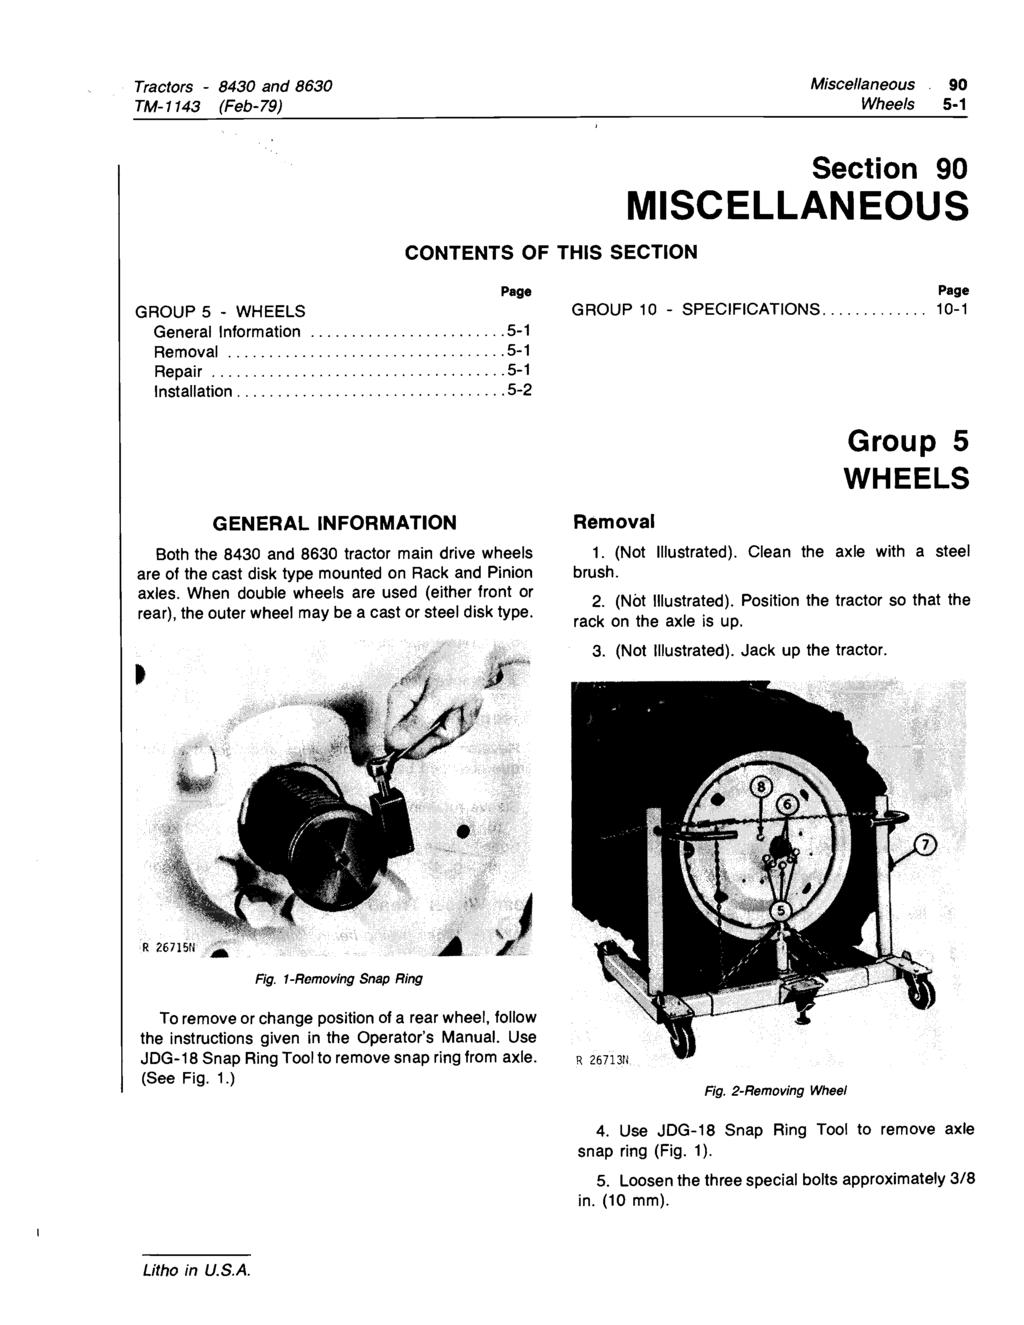 Miscellaneous 90 Wheels 5-1 Section 90 MISCELLAN EOUS GROUP 5 - WHEELS General Information... 5-1 Removal... 5-1 Repair...,... 5-1 Installation... 5-2 GROUP 10 - SPECiFiCATIONS.